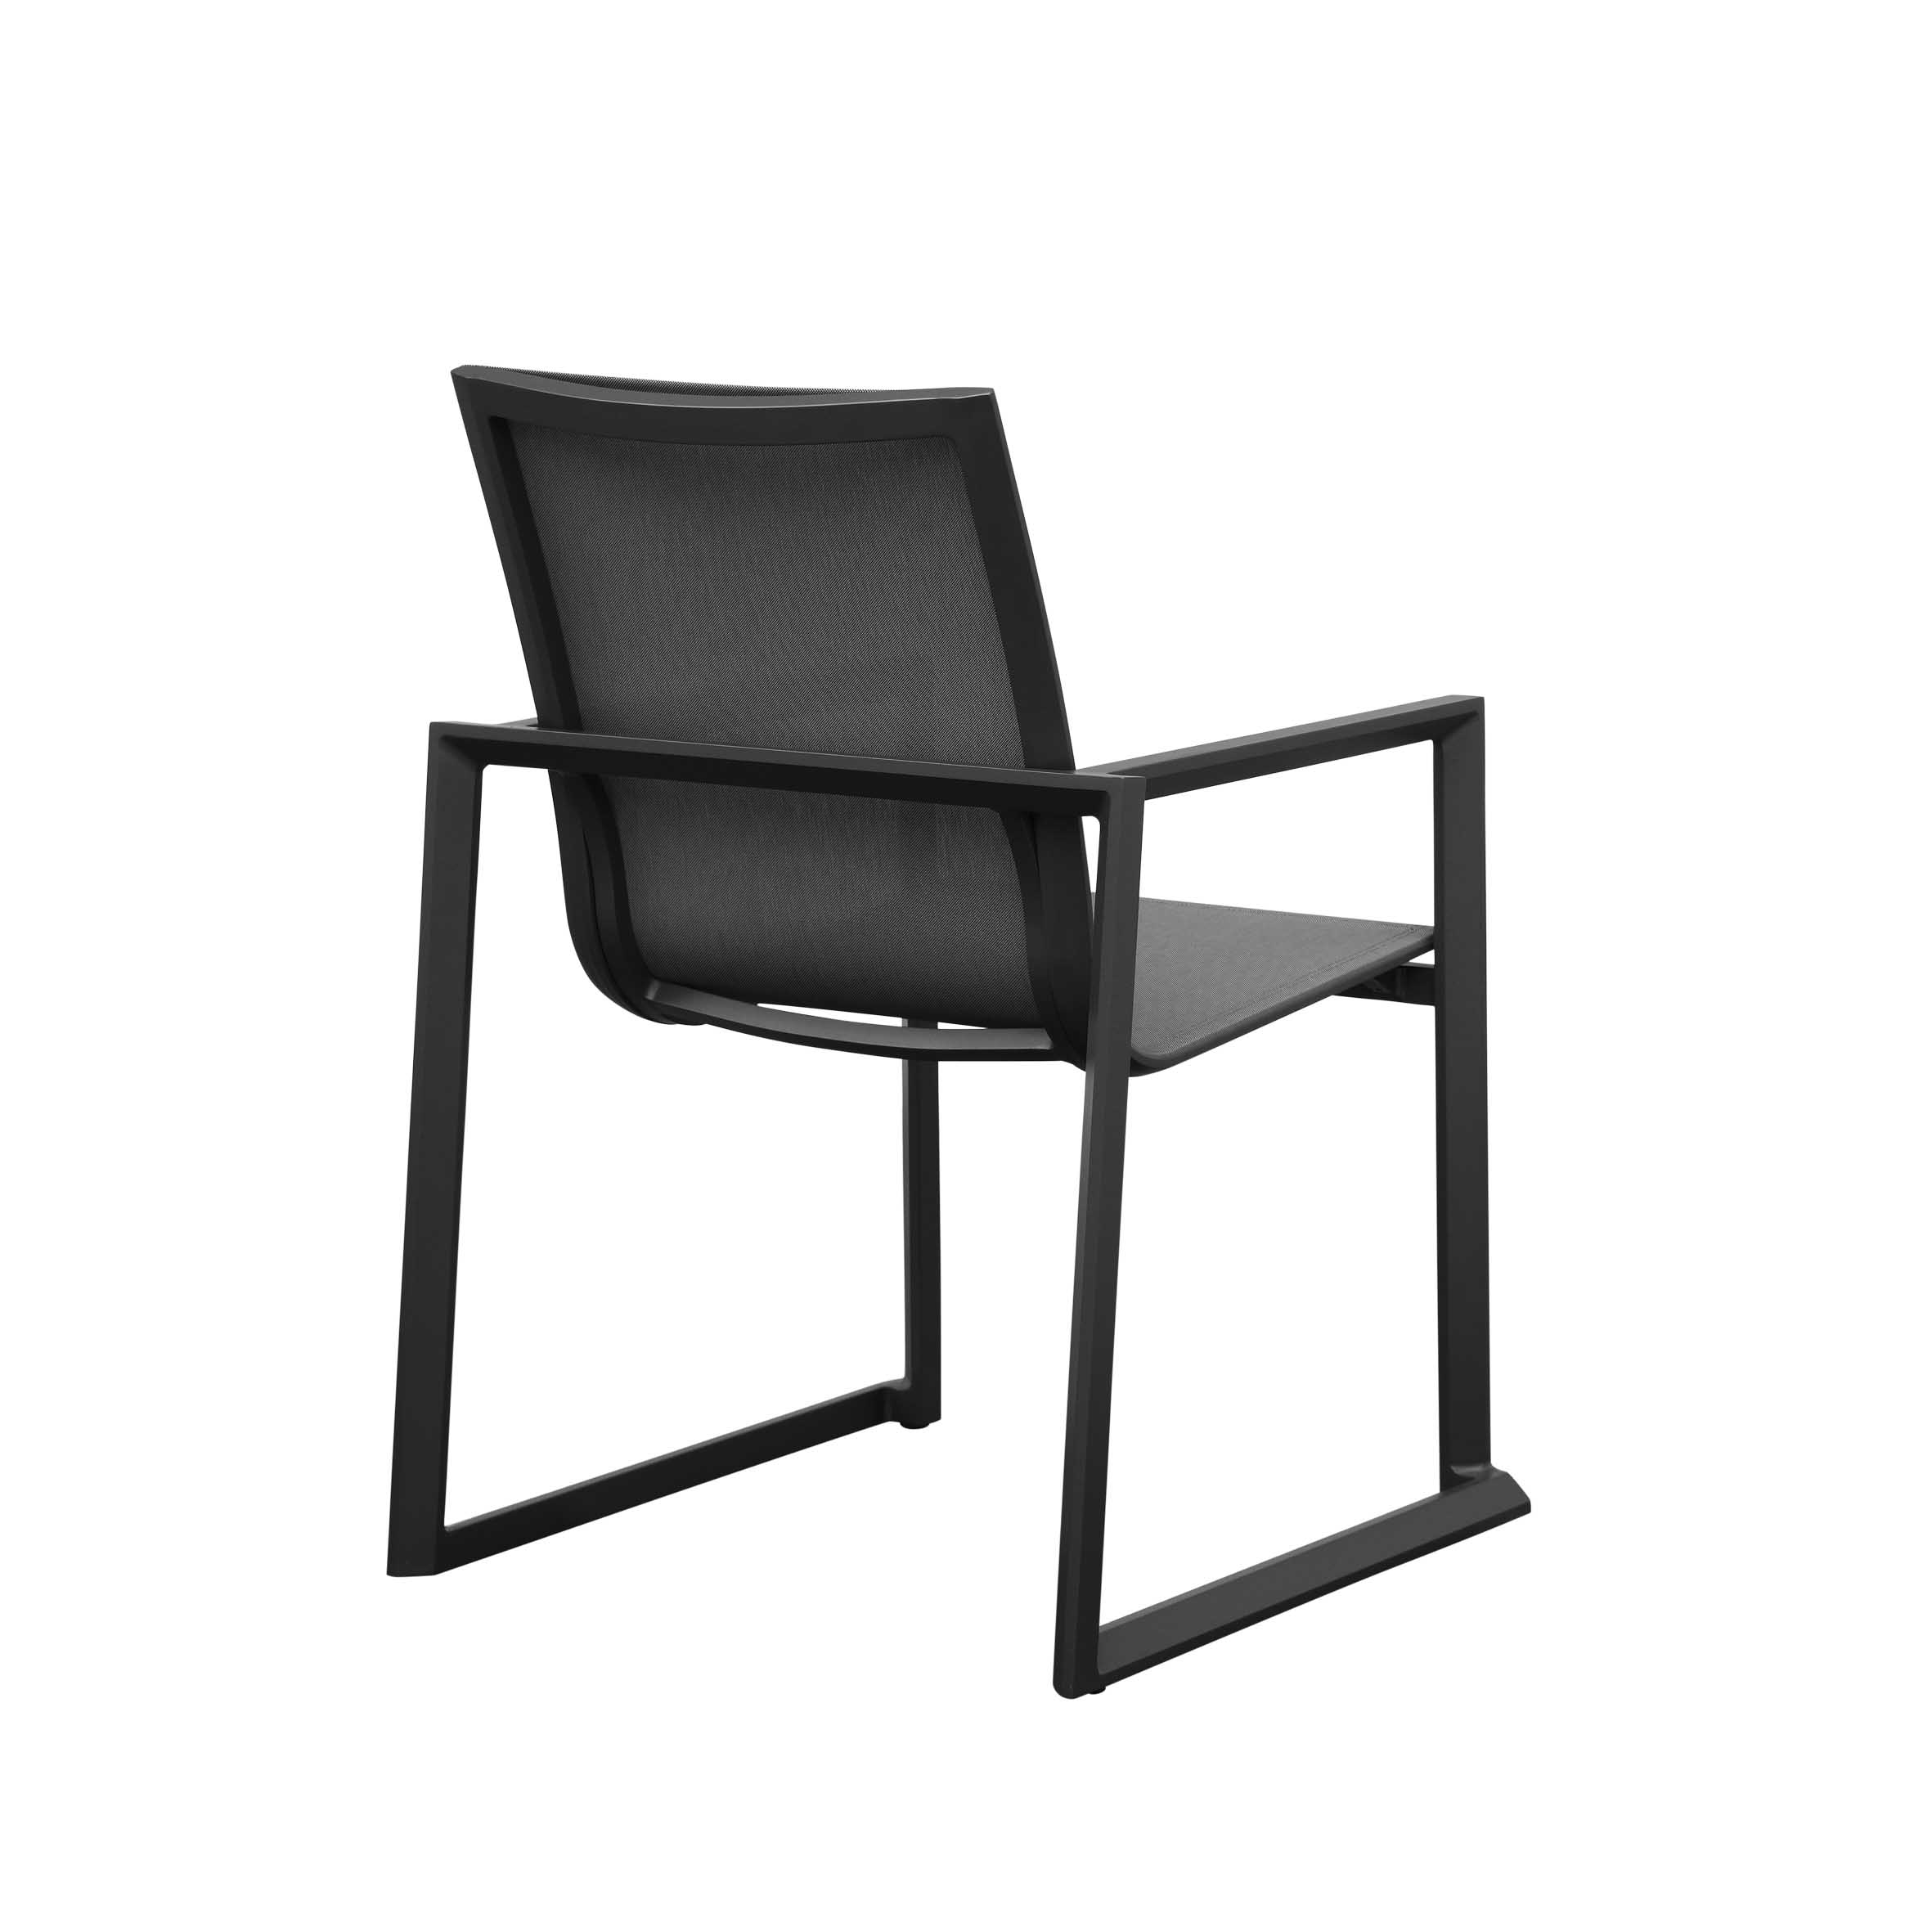 Zeus sling dining chair S2